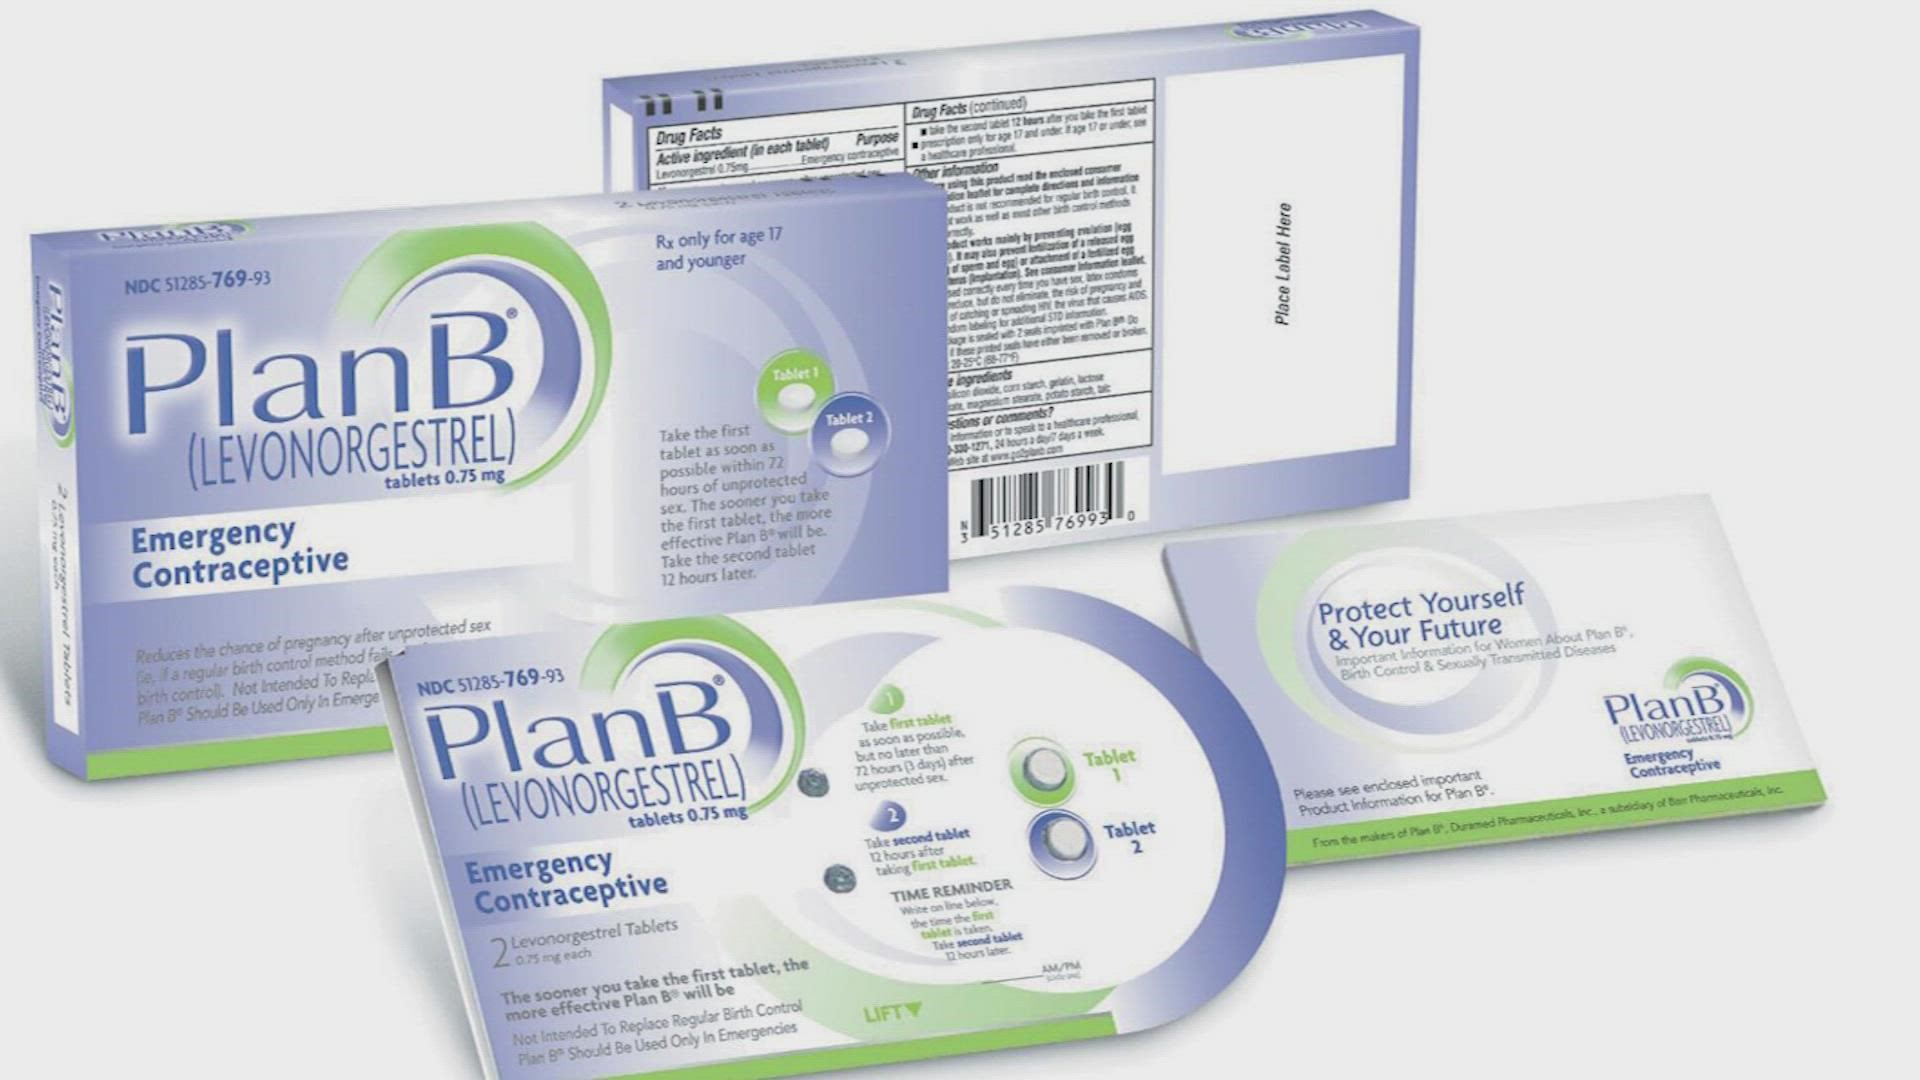 Emergency contraception, also known as the “morning-after pill,” helps to prevent pregnancy after unprotected sex or birth control failure.